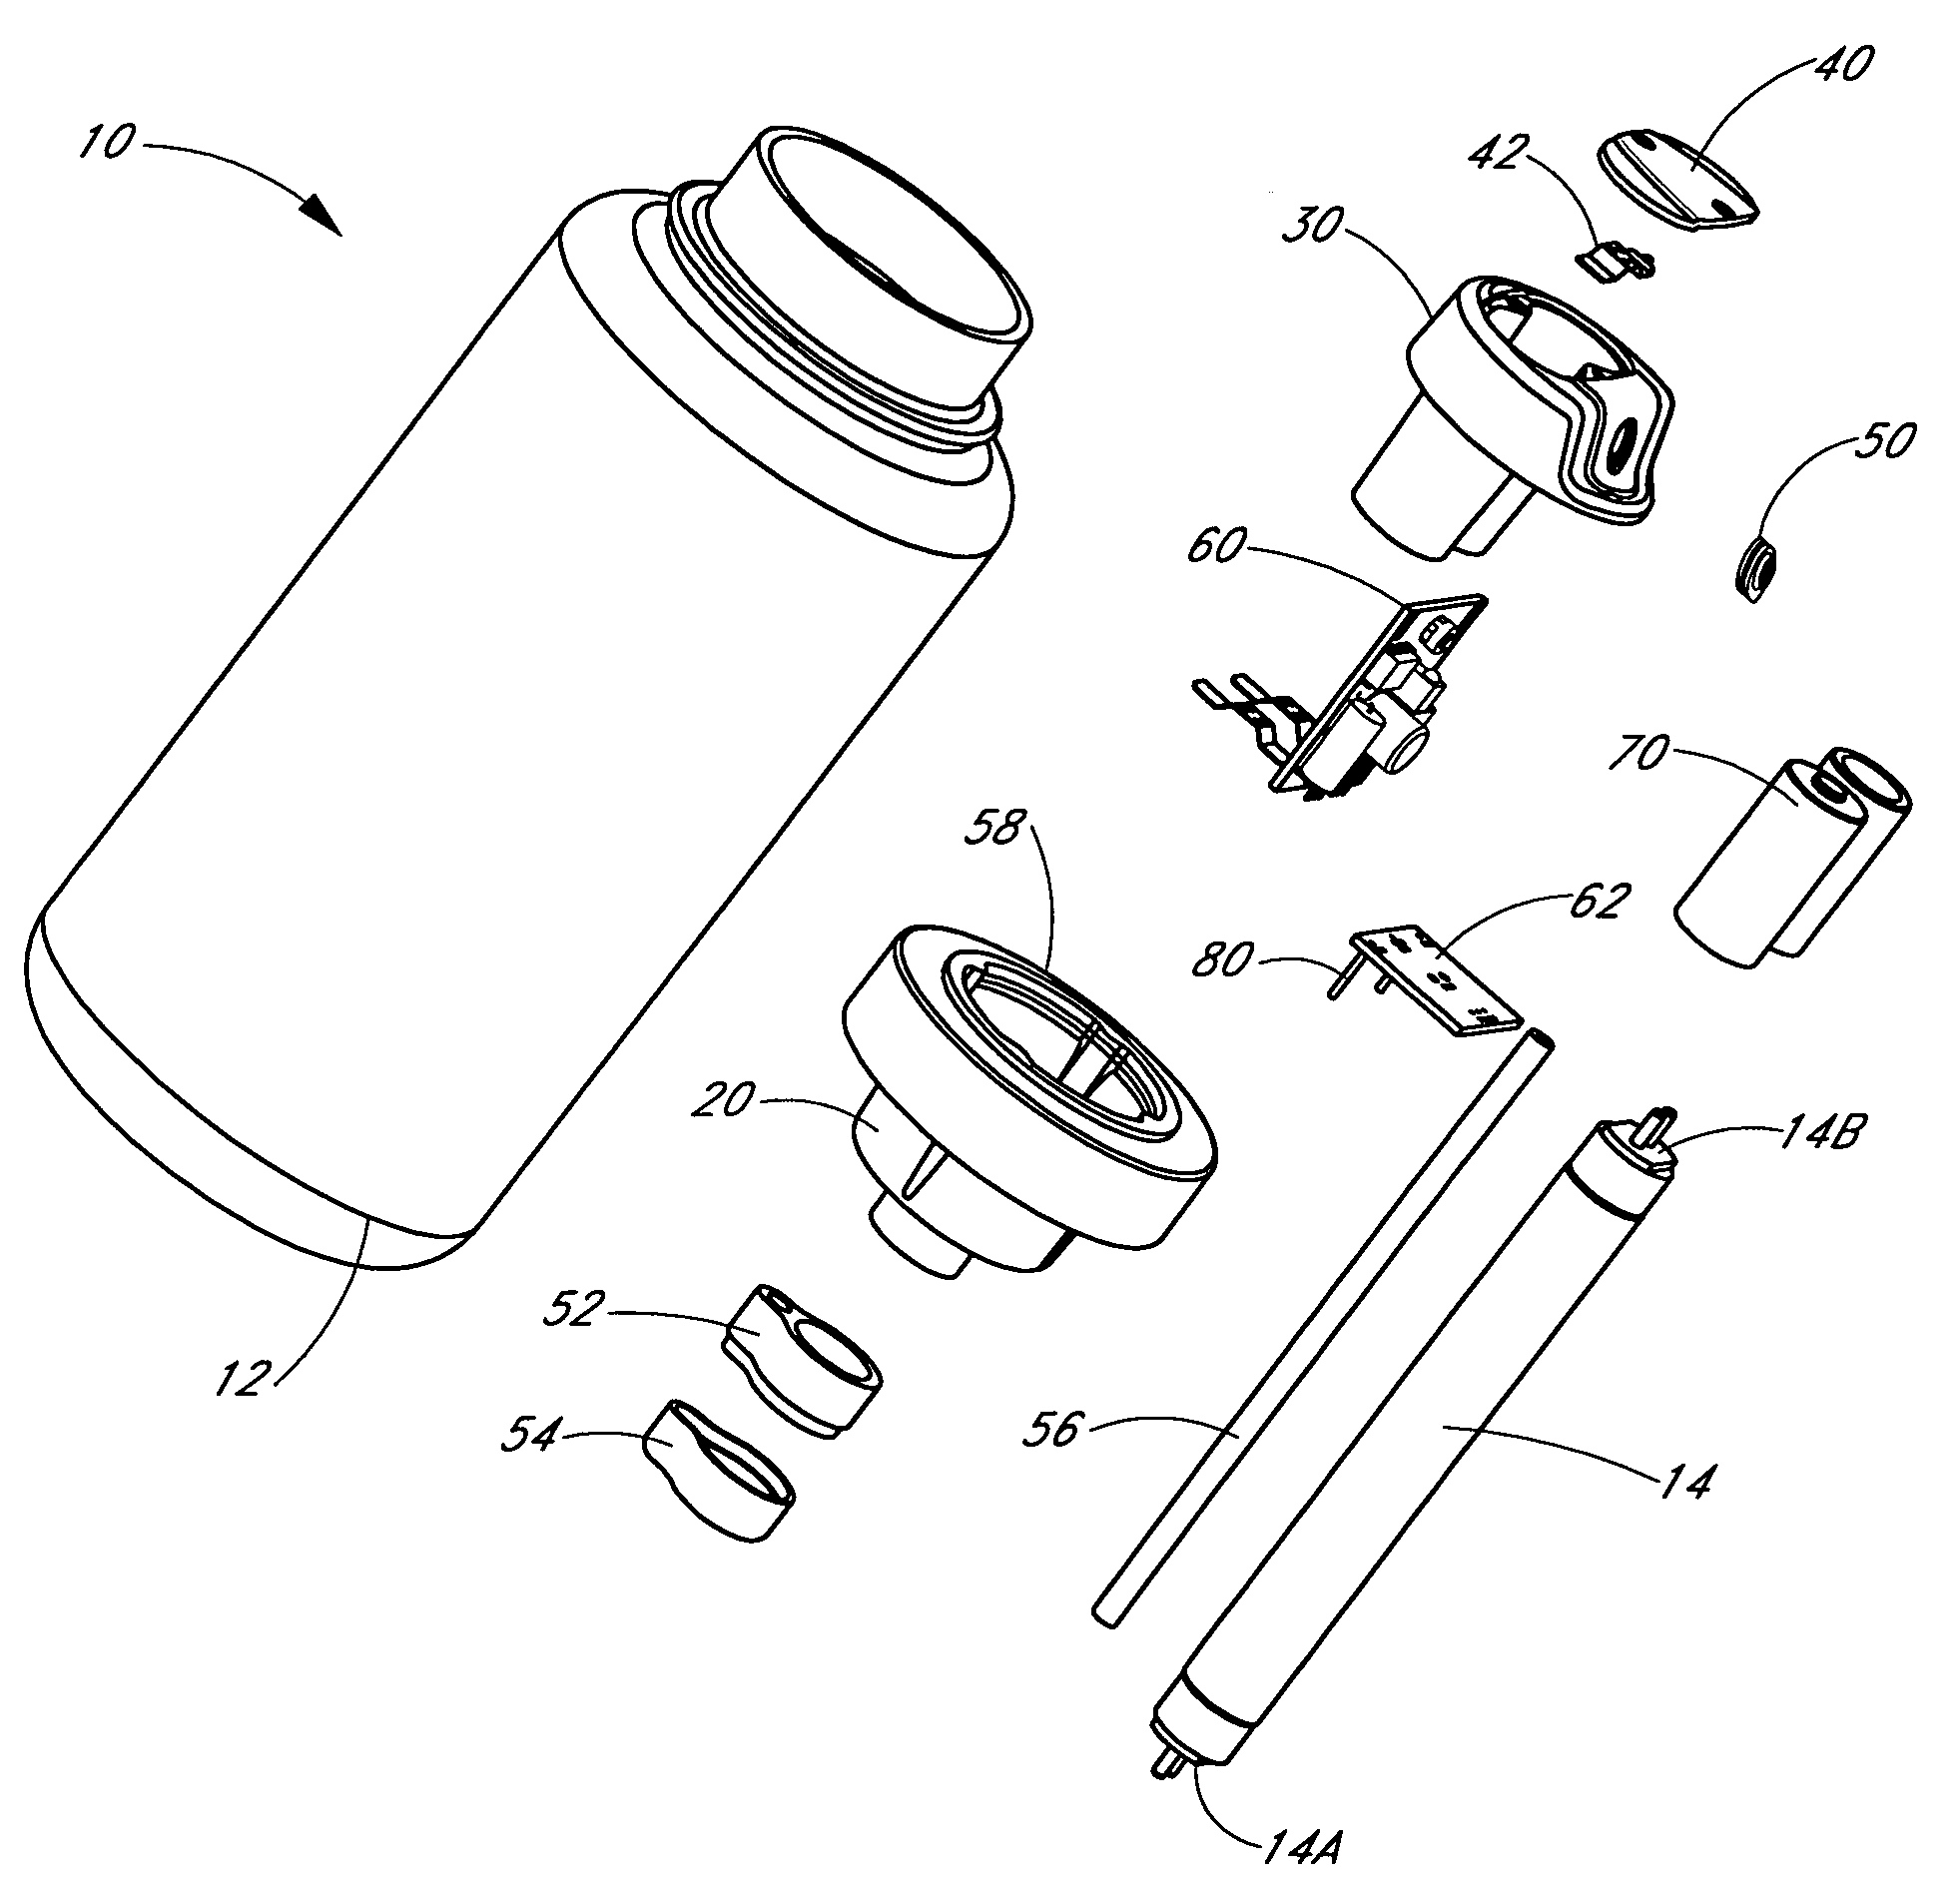 Portable ultraviolet water purification system